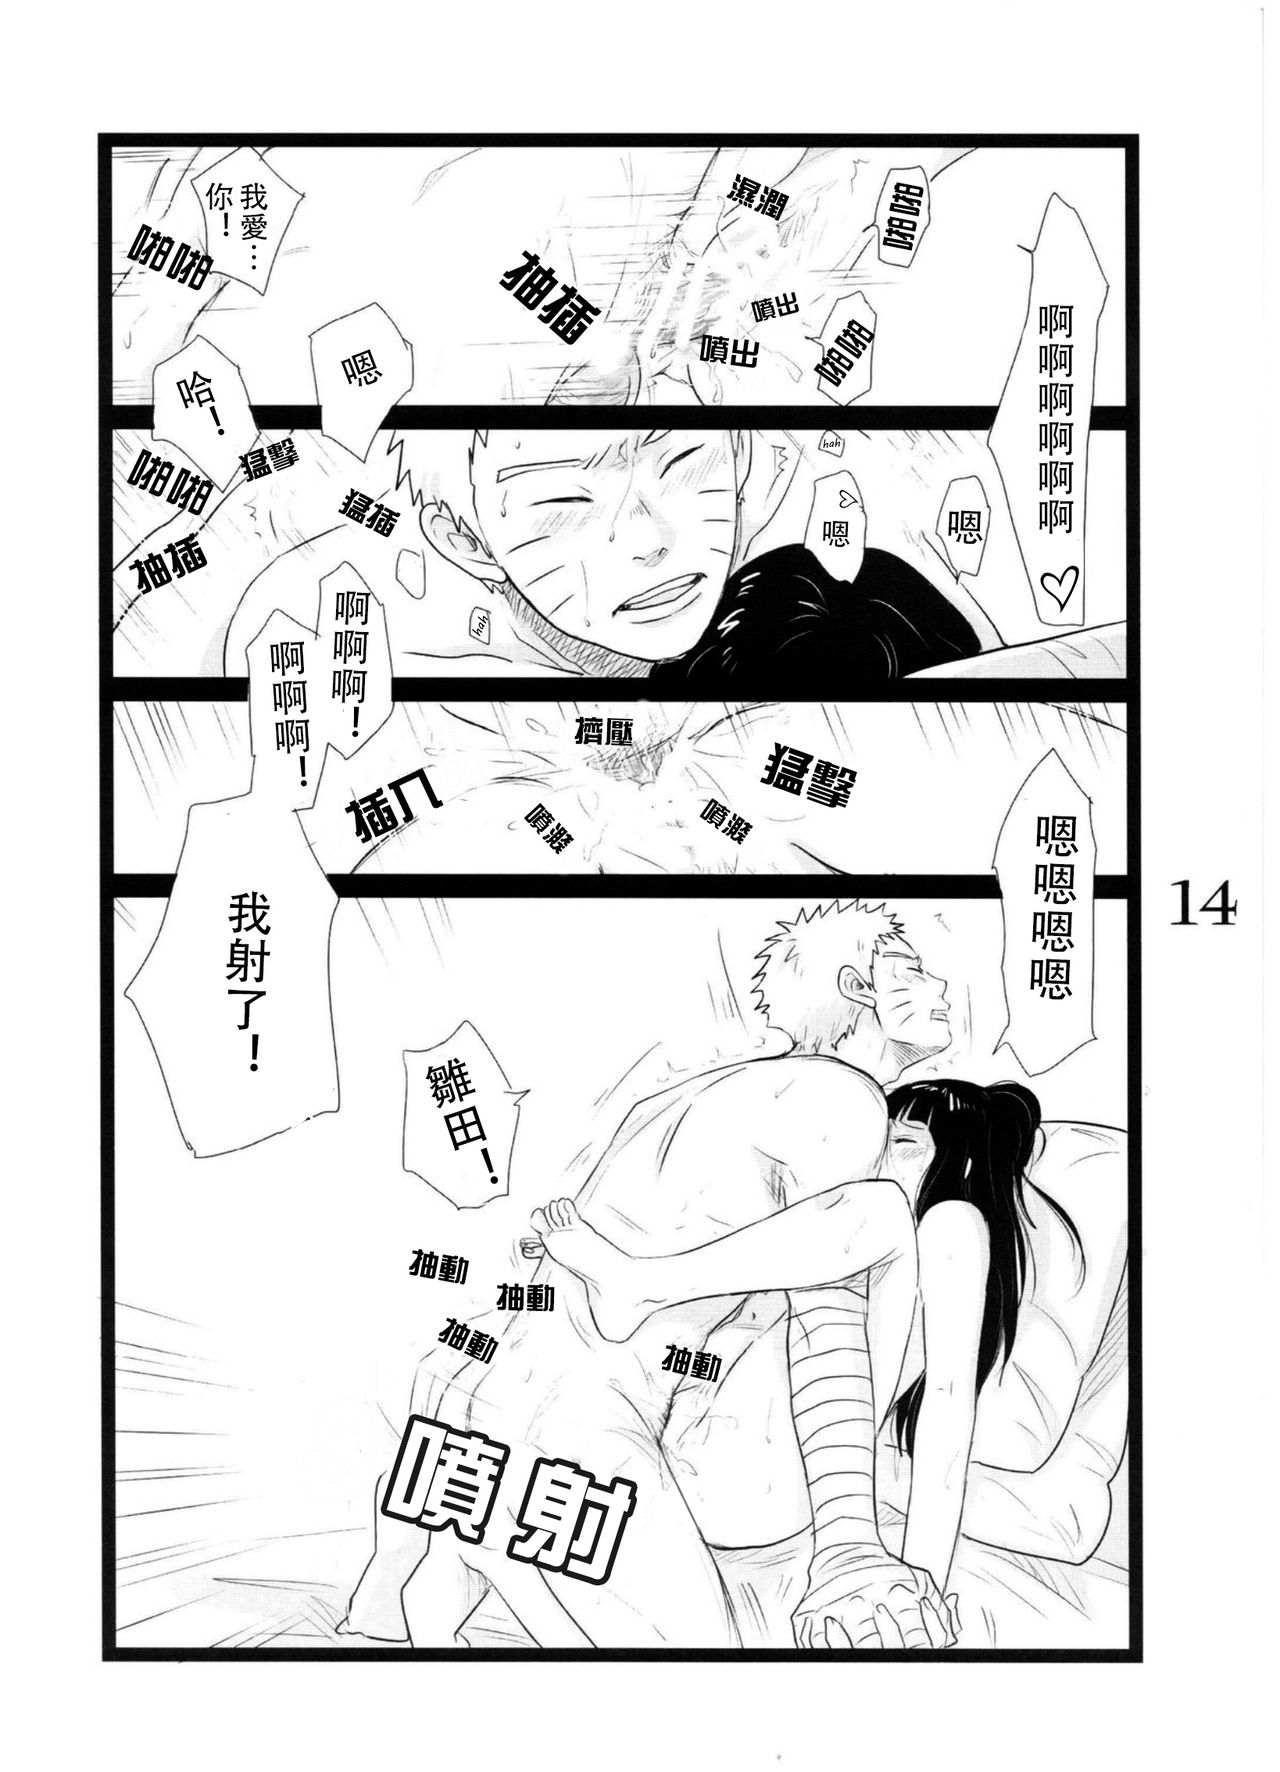 (C88) [blink (shimoyake)] YOUR MY SWEET - I LOVE YOU DARLING (Naruto) [Chinese] [沒有漢化] page 15 full